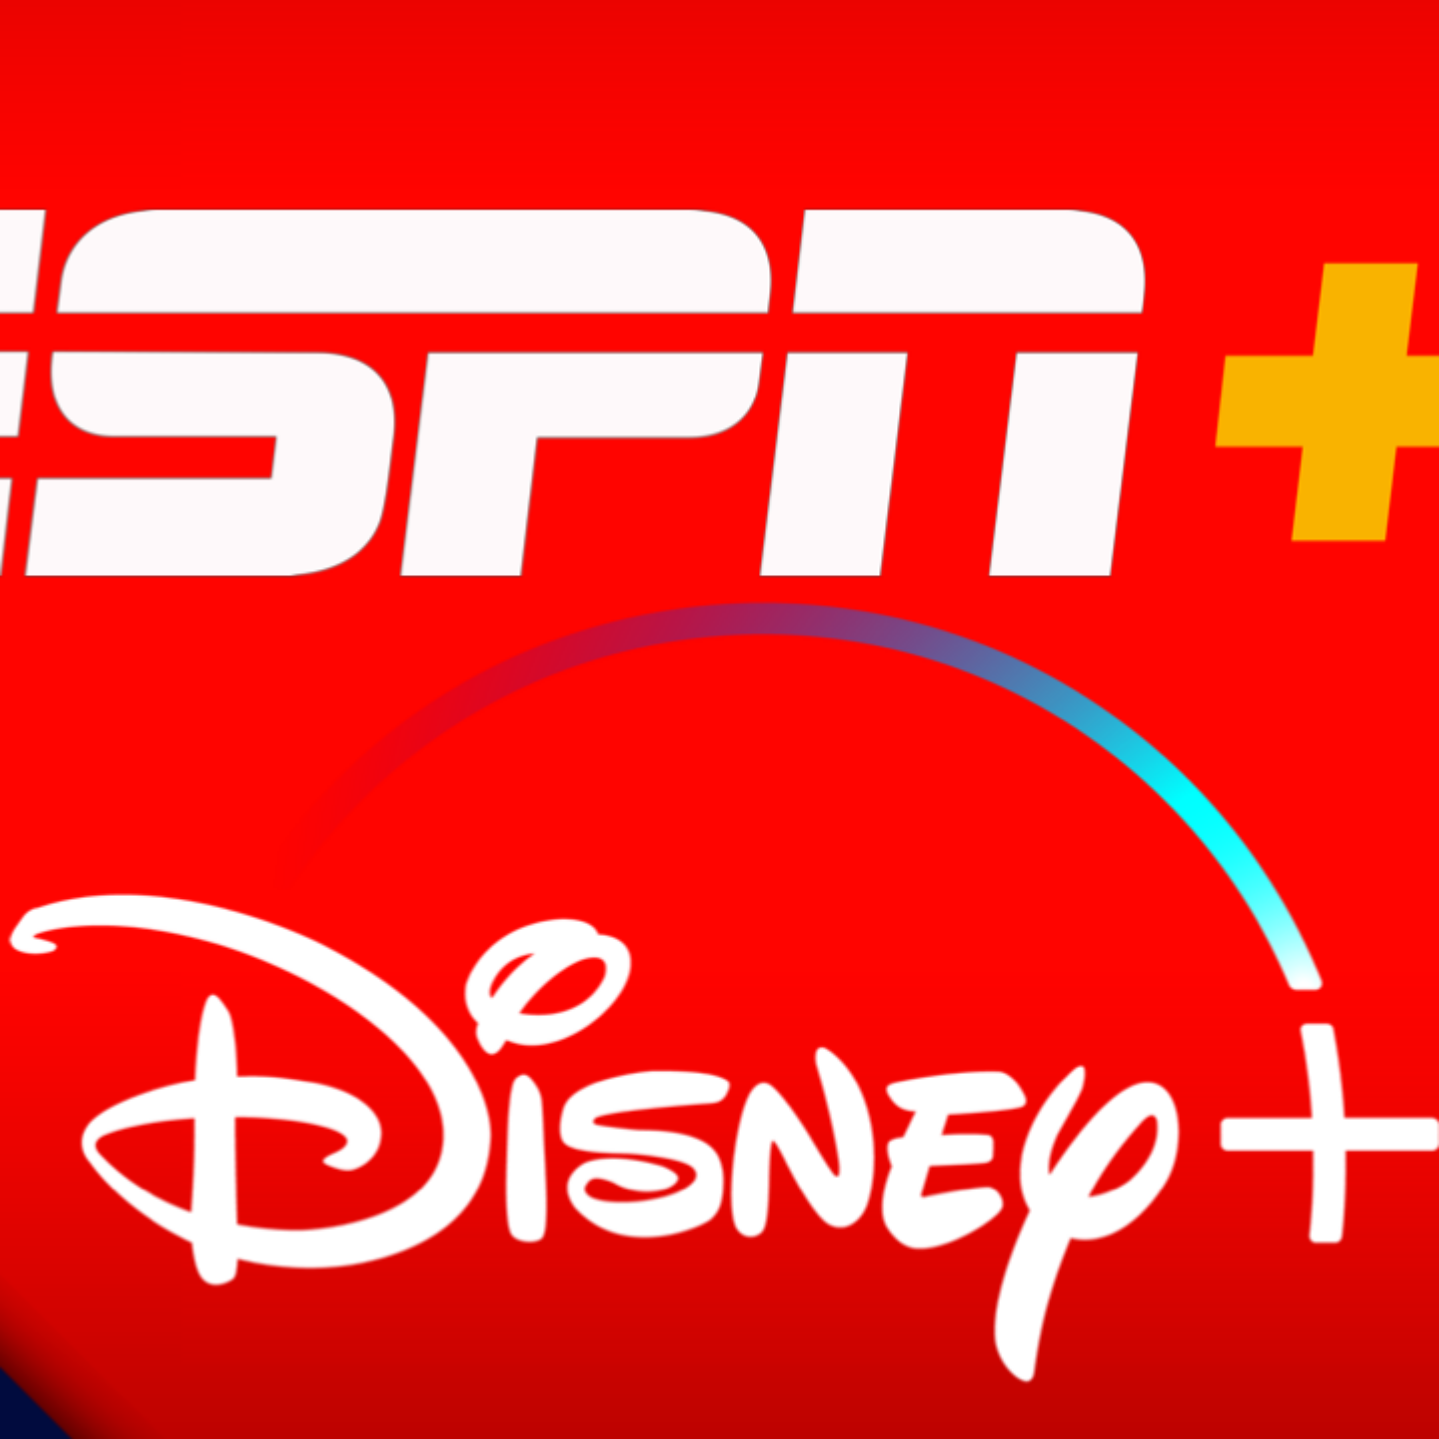 will-espn-join-disney-what-s-on-disney-plus-podcast-198-what-s